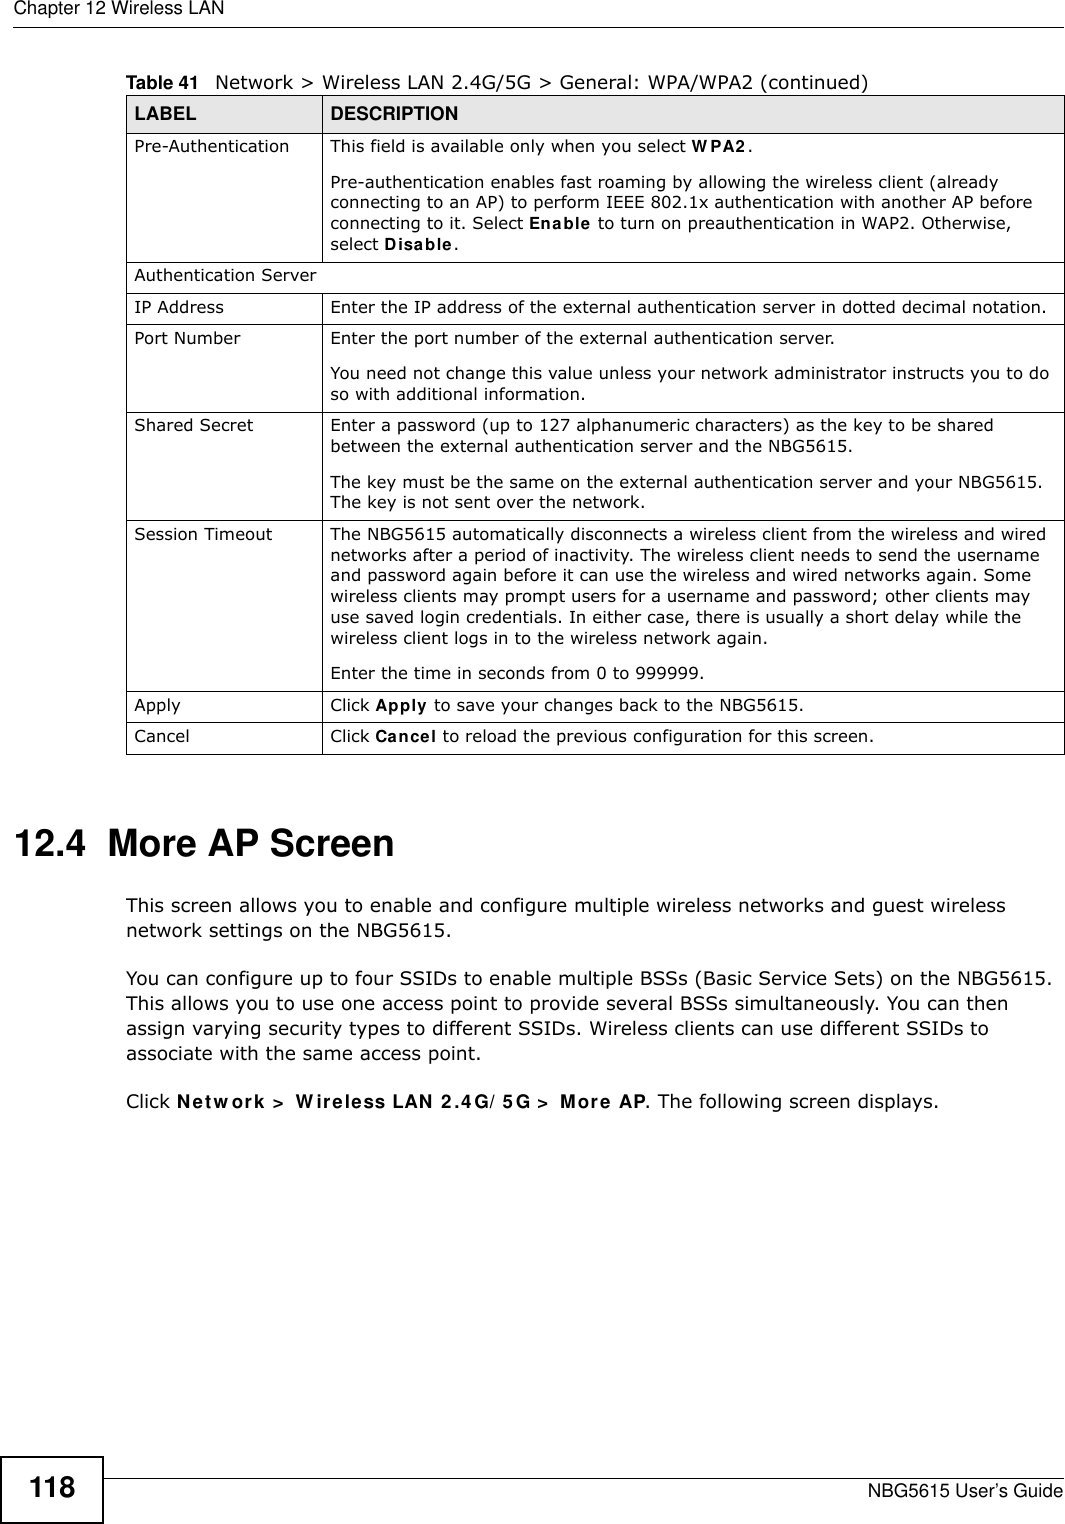 Chapter 12 Wireless LANNBG5615 User’s Guide11812.4  More AP Screen This screen allows you to enable and configure multiple wireless networks and guest wireless network settings on the NBG5615.You can configure up to four SSIDs to enable multiple BSSs (Basic Service Sets) on the NBG5615. This allows you to use one access point to provide several BSSs simultaneously. You can then assign varying security types to different SSIDs. Wireless clients can use different SSIDs to associate with the same access point.Click Netw ork &gt;  W ireless LAN 2 .4 G/ 5G &gt;  More AP. The following screen displays.Pre-Authentication  This field is available only when you select W PA2 .Pre-authentication enables fast roaming by allowing the wireless client (already connecting to an AP) to perform IEEE 802.1x authentication with another AP before connecting to it. Select Enable to turn on preauthentication in WAP2. Otherwise, select Disable.Authentication ServerIP Address Enter the IP address of the external authentication server in dotted decimal notation.Port Number Enter the port number of the external authentication server.  You need not change this value unless your network administrator instructs you to do so with additional information. Shared Secret Enter a password (up to 127 alphanumeric characters) as the key to be shared between the external authentication server and the NBG5615.The key must be the same on the external authentication server and your NBG5615. The key is not sent over the network. Session Timeout The NBG5615 automatically disconnects a wireless client from the wireless and wired networks after a period of inactivity. The wireless client needs to send the username and password again before it can use the wireless and wired networks again. Some wireless clients may prompt users for a username and password; other clients may use saved login credentials. In either case, there is usually a short delay while the wireless client logs in to the wireless network again.Enter the time in seconds from 0 to 999999.Apply Click Apply to save your changes back to the NBG5615.Cancel Click Cancel to reload the previous configuration for this screen.Table 41   Network &gt; Wireless LAN 2.4G/5G &gt; General: WPA/WPA2 (continued)LABEL DESCRIPTION